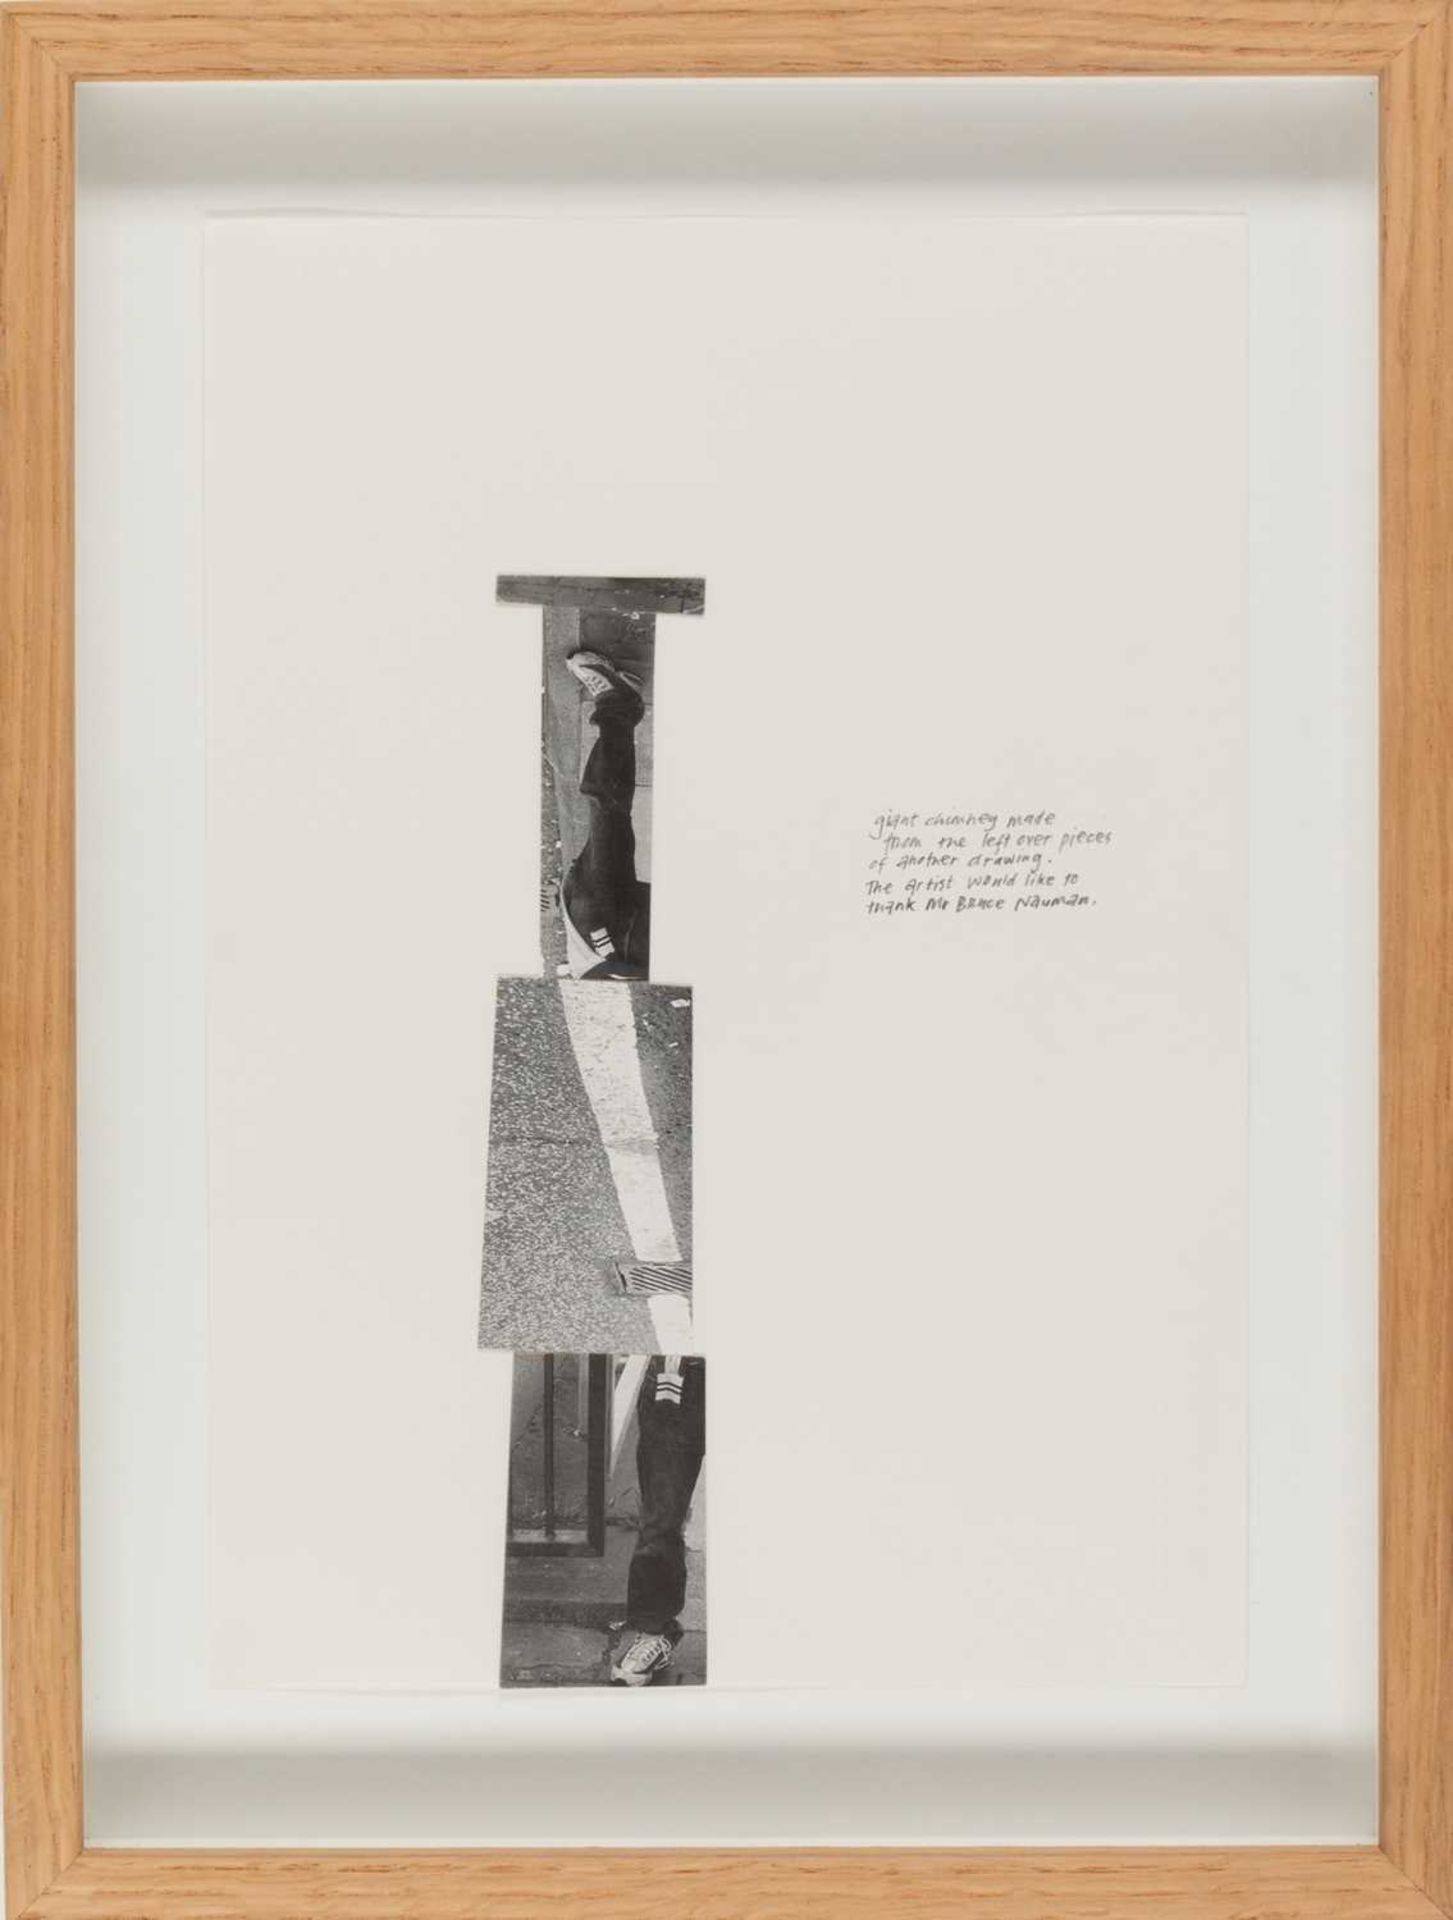 Jonathan Monk (1969 Leicester – lebt in Berlin) - Image 2 of 3